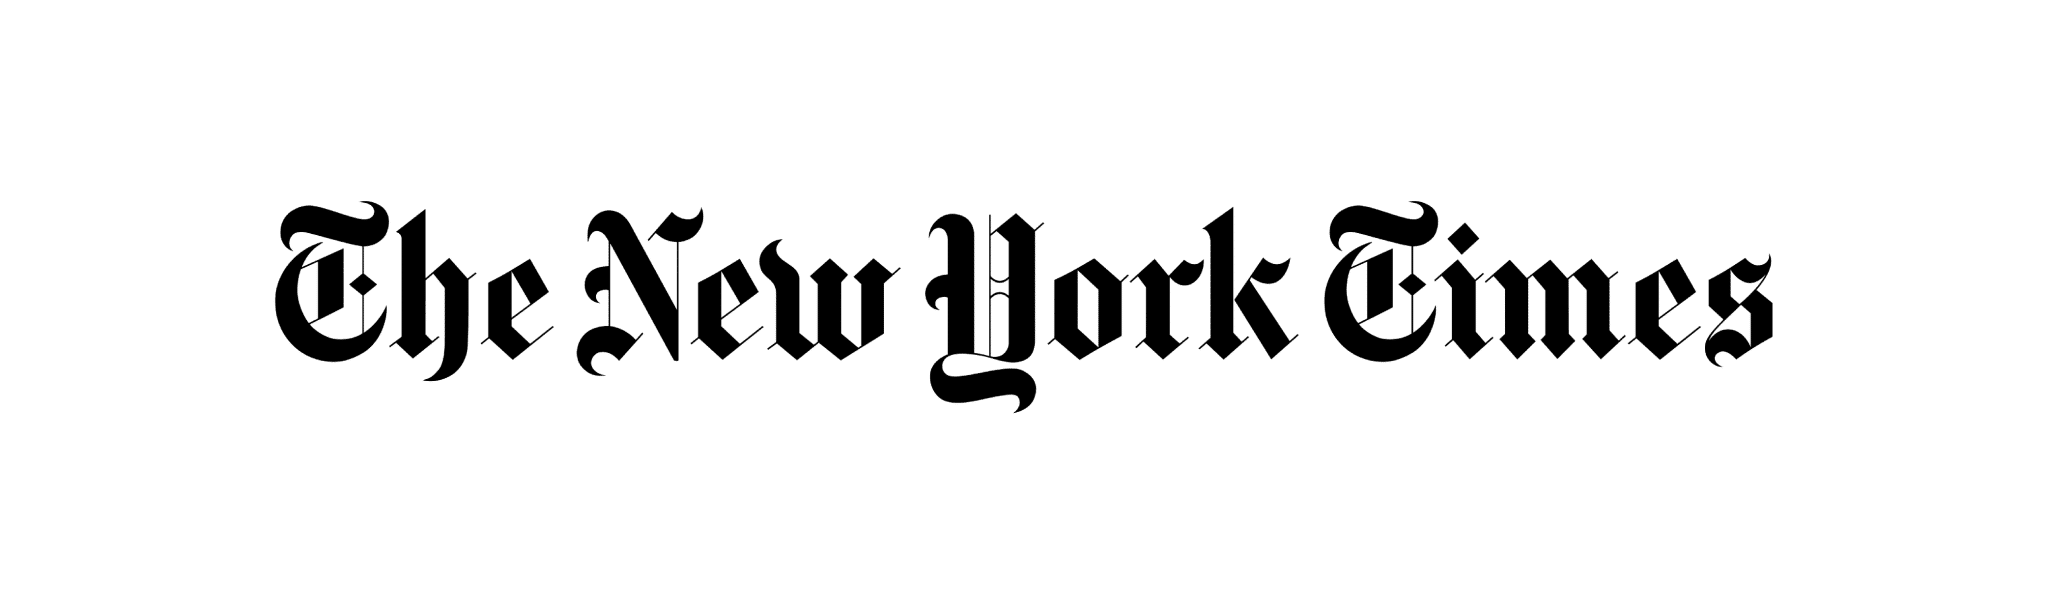 CFP Publication Logos The New York Times